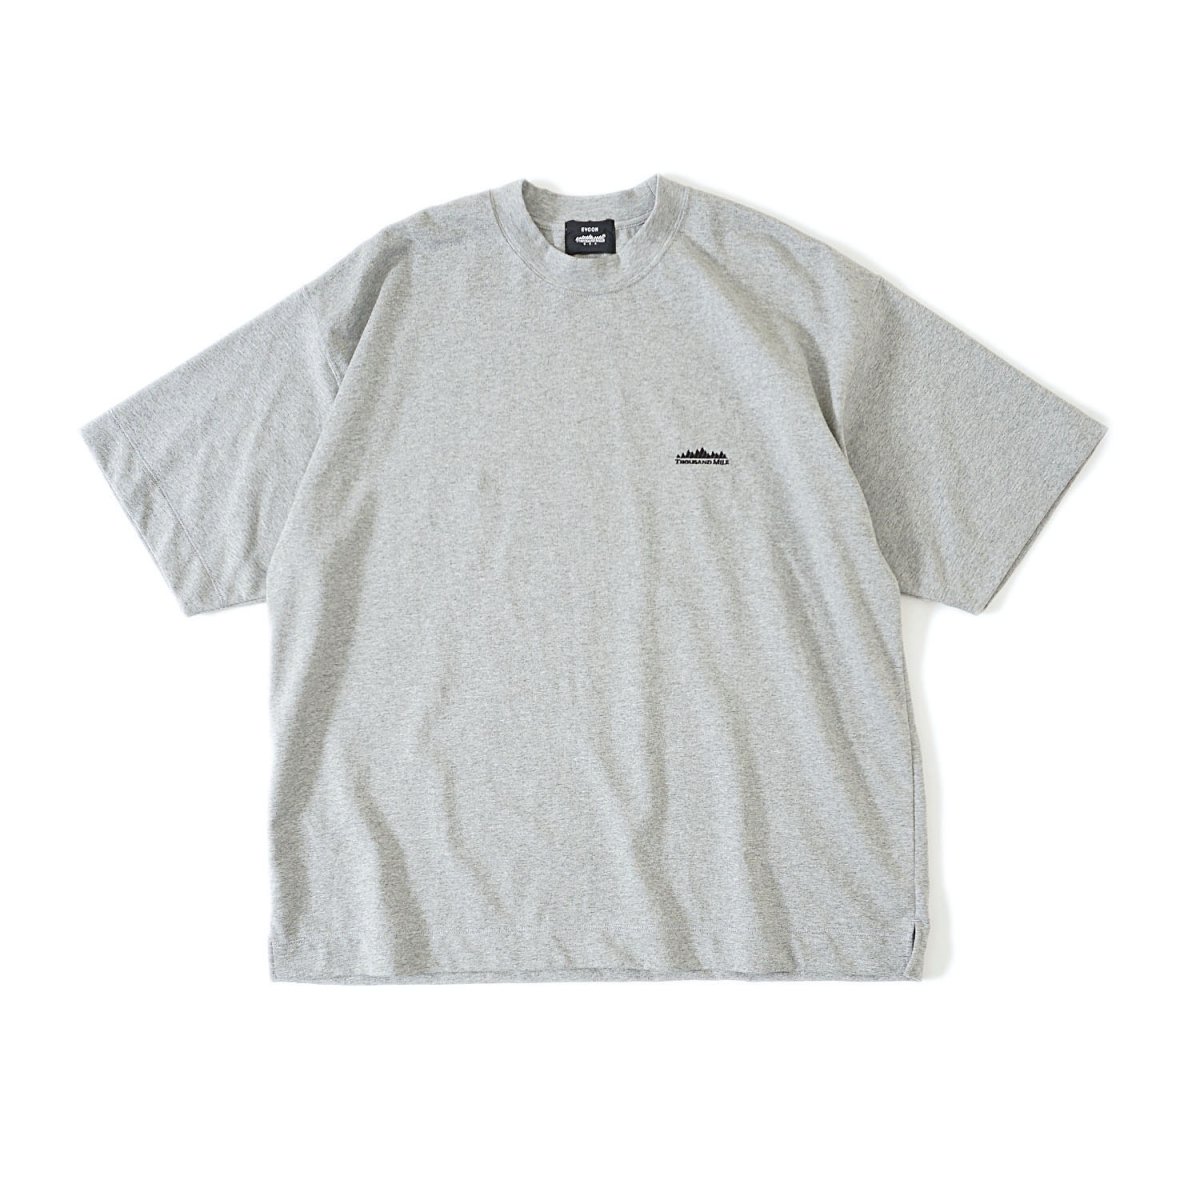 EVCON<BR>THOUSAND MILE SUMMER SWEAT SET UP (GRAY)